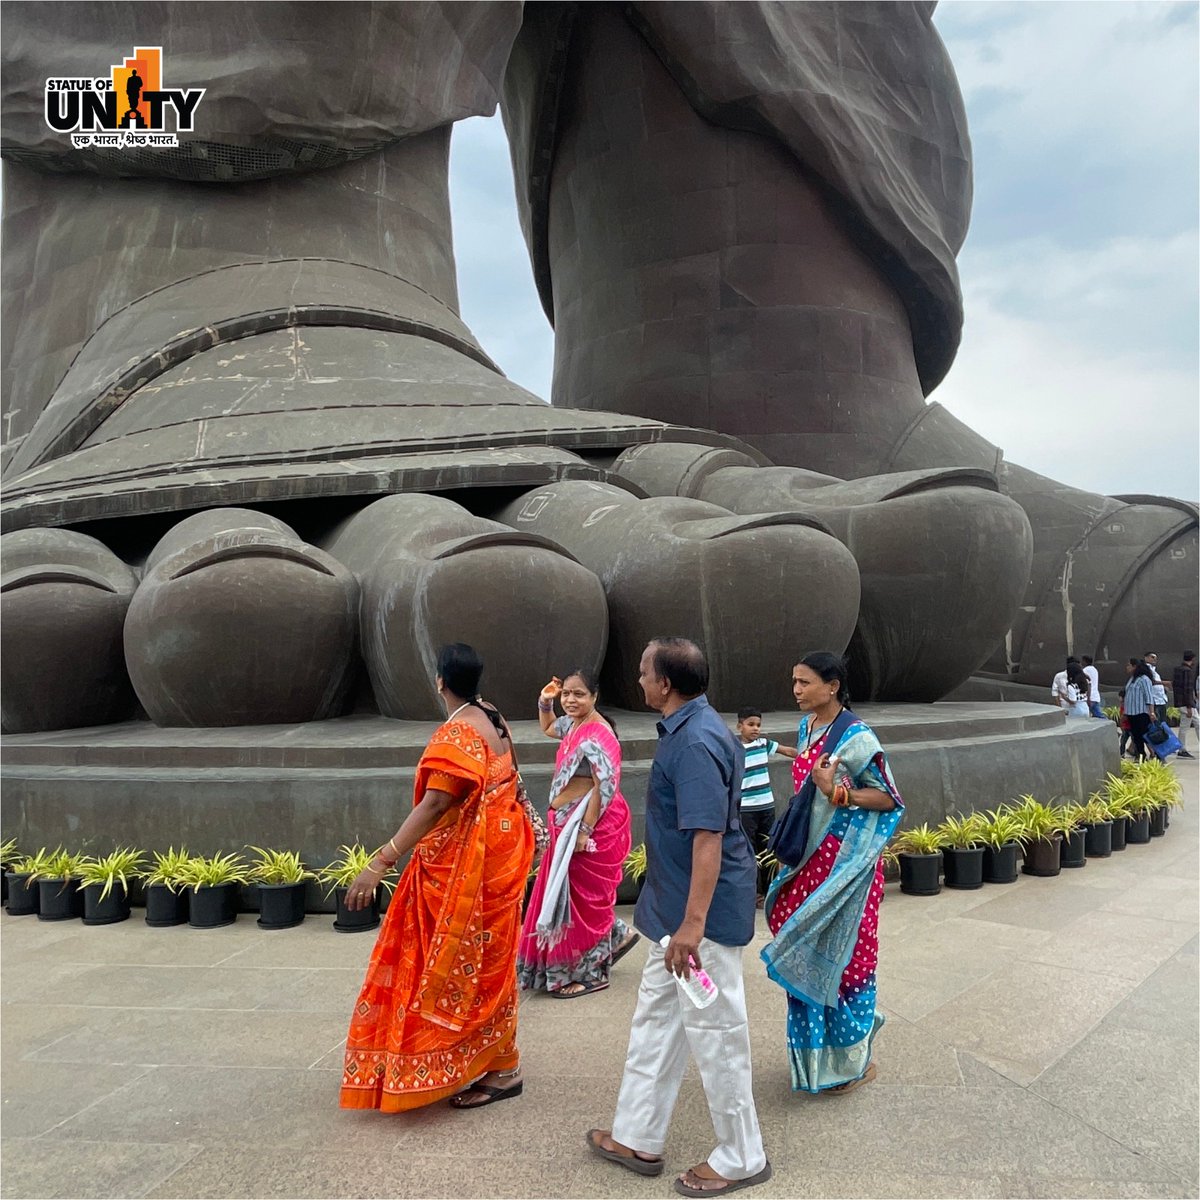 Stand in awe at the feet of the World’s Tallest Statue, the #StatueOfUnity!! 

Plan your trip to #EktaNagar today and experience the spirit of unity that binds our nation together

#ExploreGujarat #UnityInDiversity #IndiaUnity #GujaratTourism #IncredibleIndia